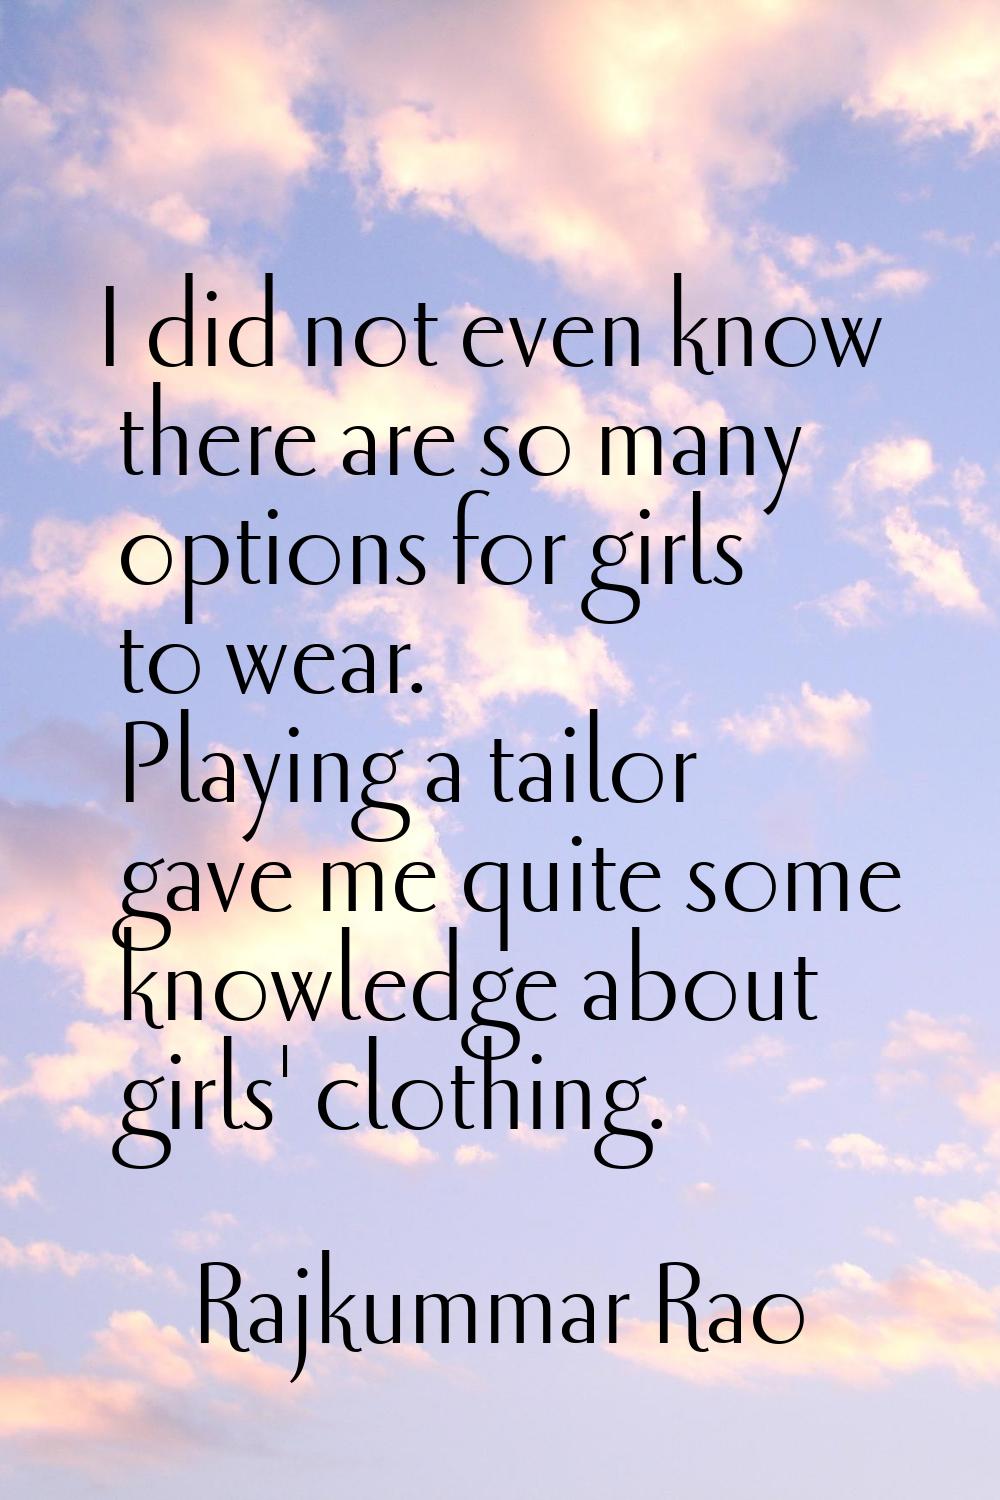 I did not even know there are so many options for girls to wear. Playing a tailor gave me quite som